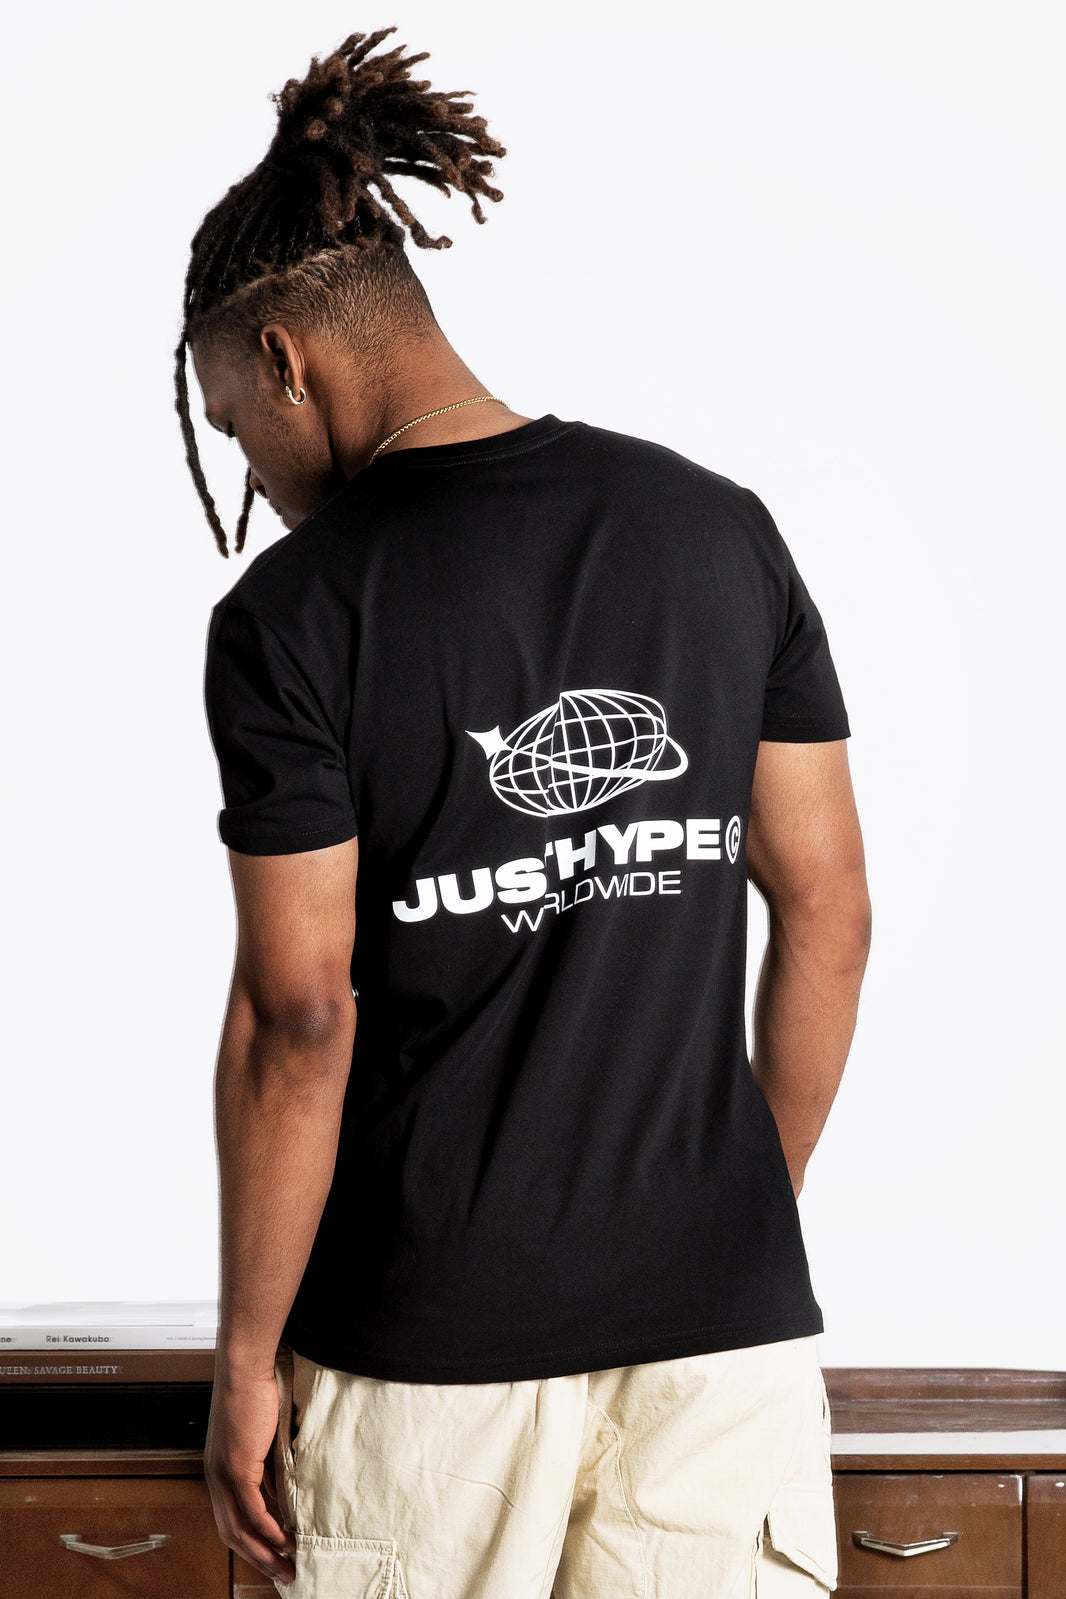 New in - Mens Hoodies, Tees, Joggers, Jackets | Hype.